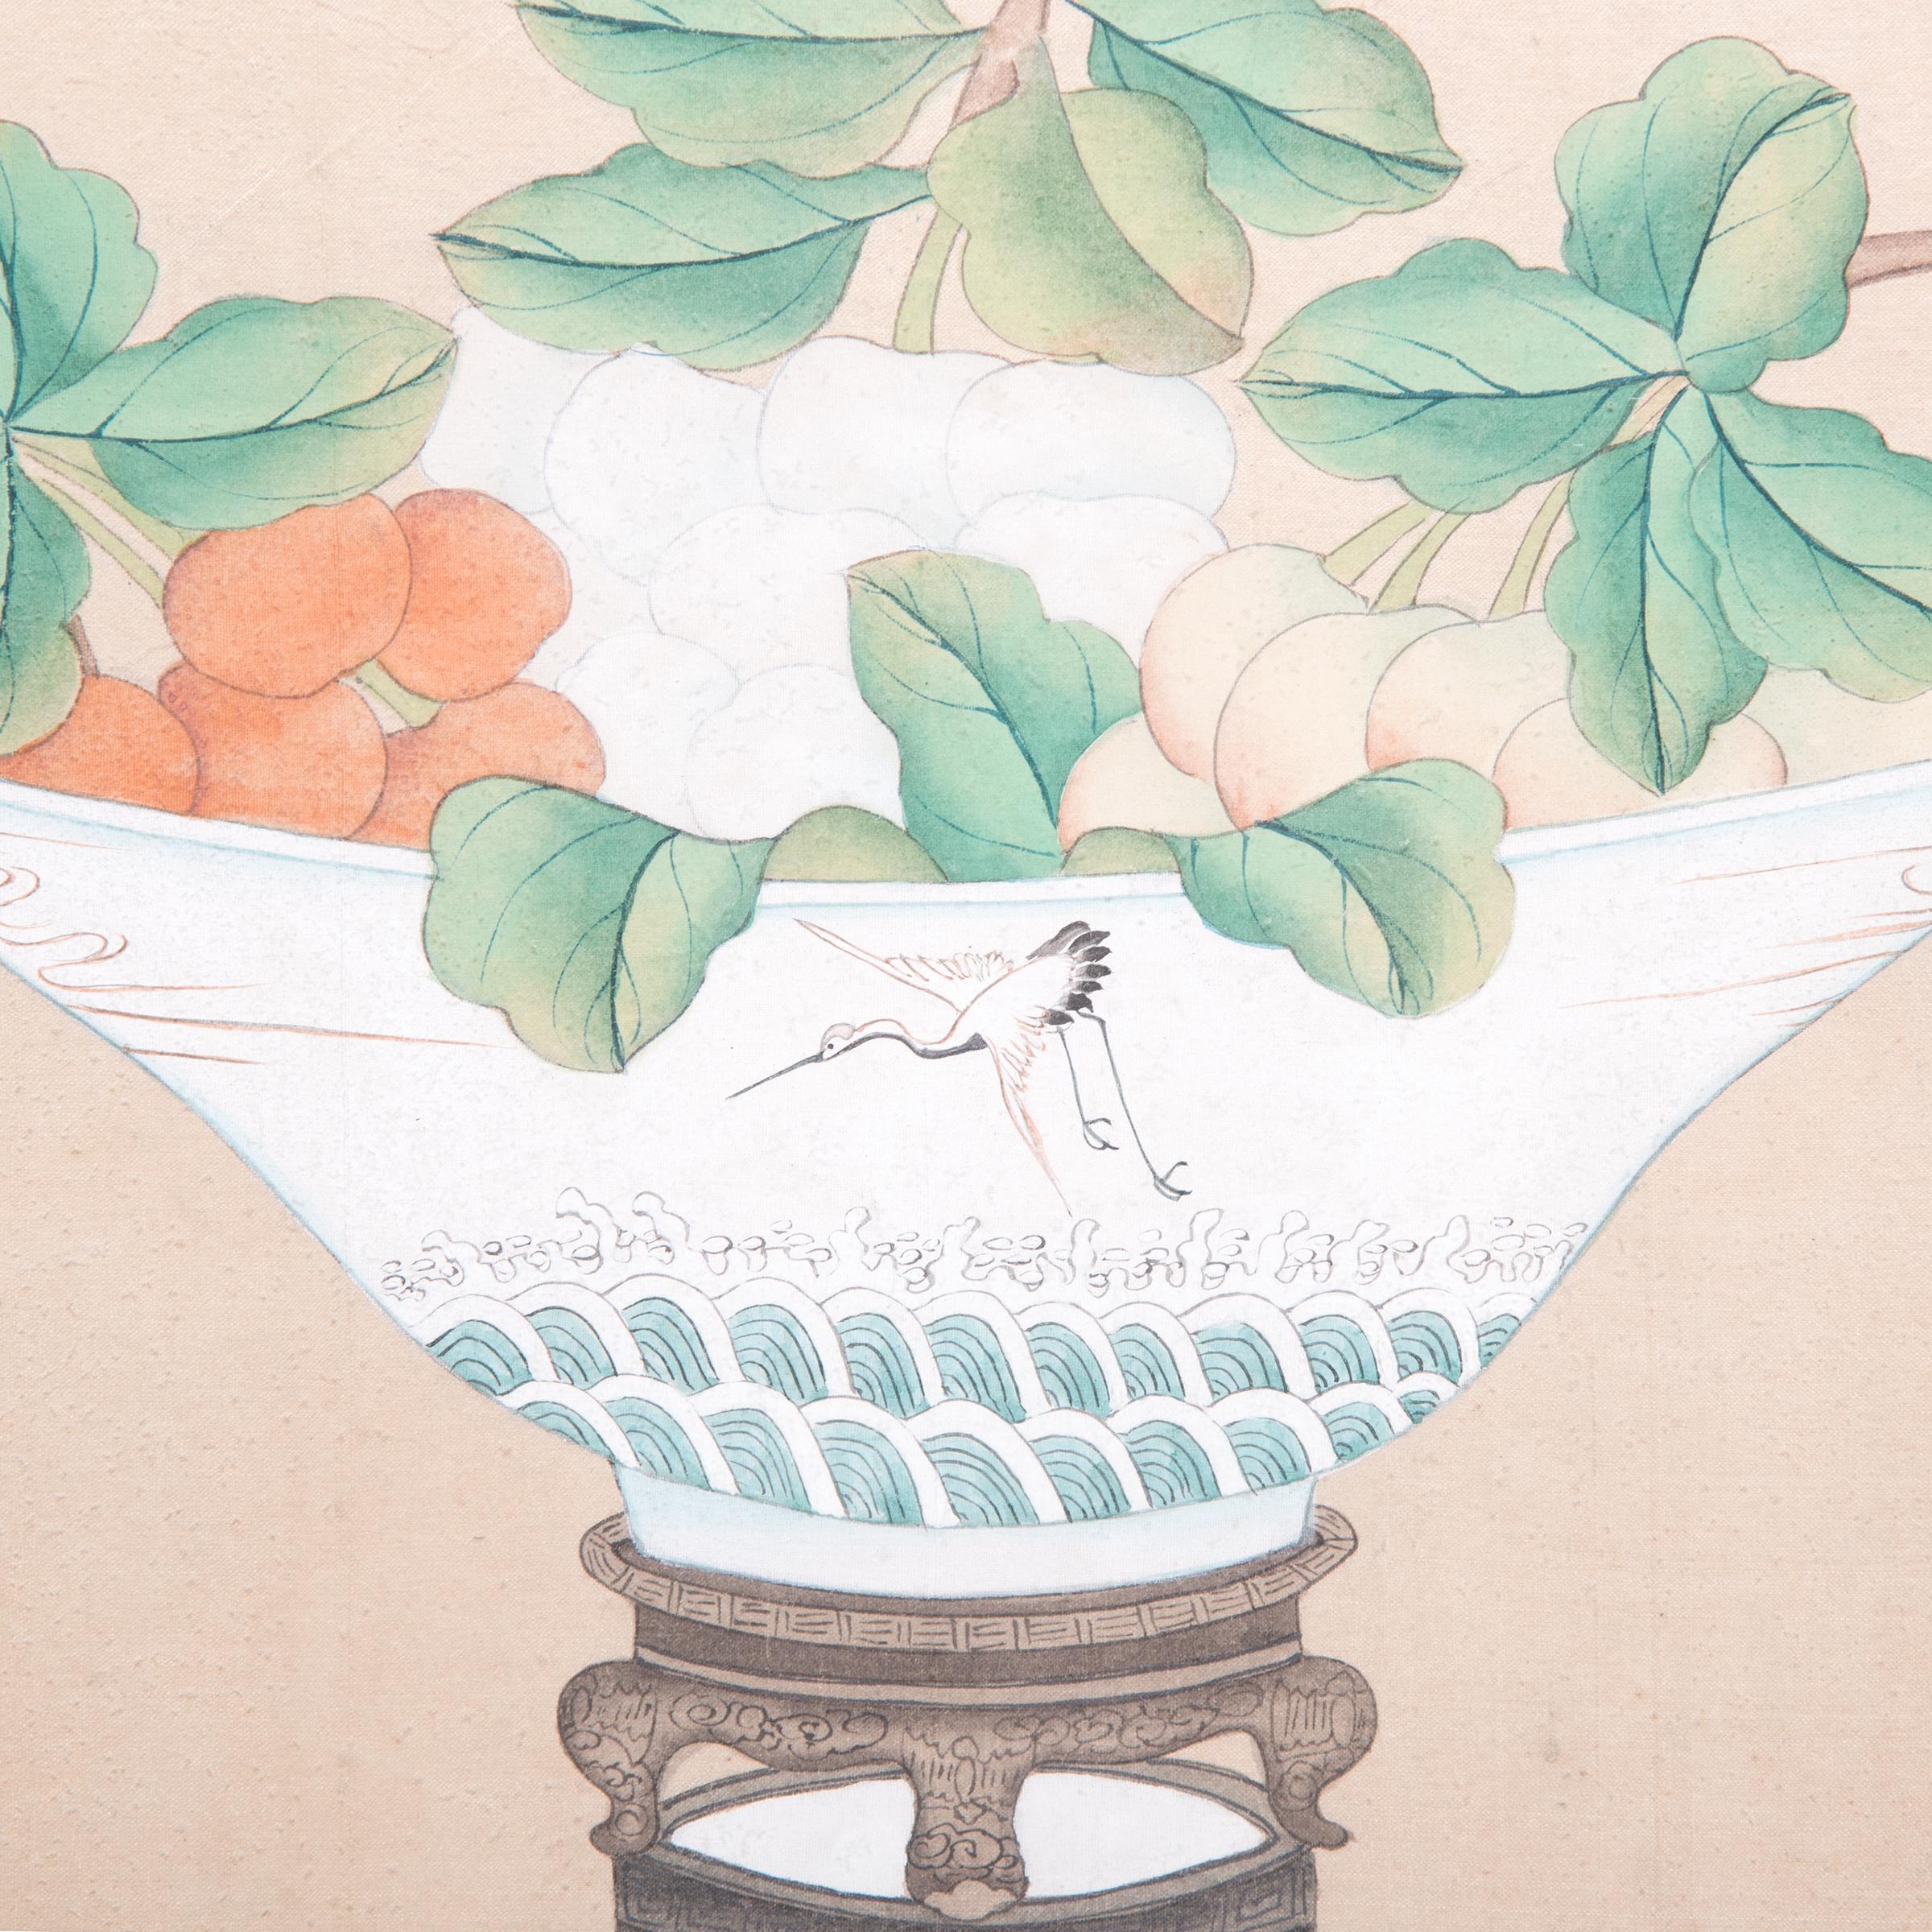 With soft yet clear color, this Qing-dynasty watercolor by artist Won Tai depicts freshly snipped, fruit-laden branches presented in a fine porcelain bowl. Exploiting the medium’s sheer color, the artist used a serene, pastel palette and a keen eye